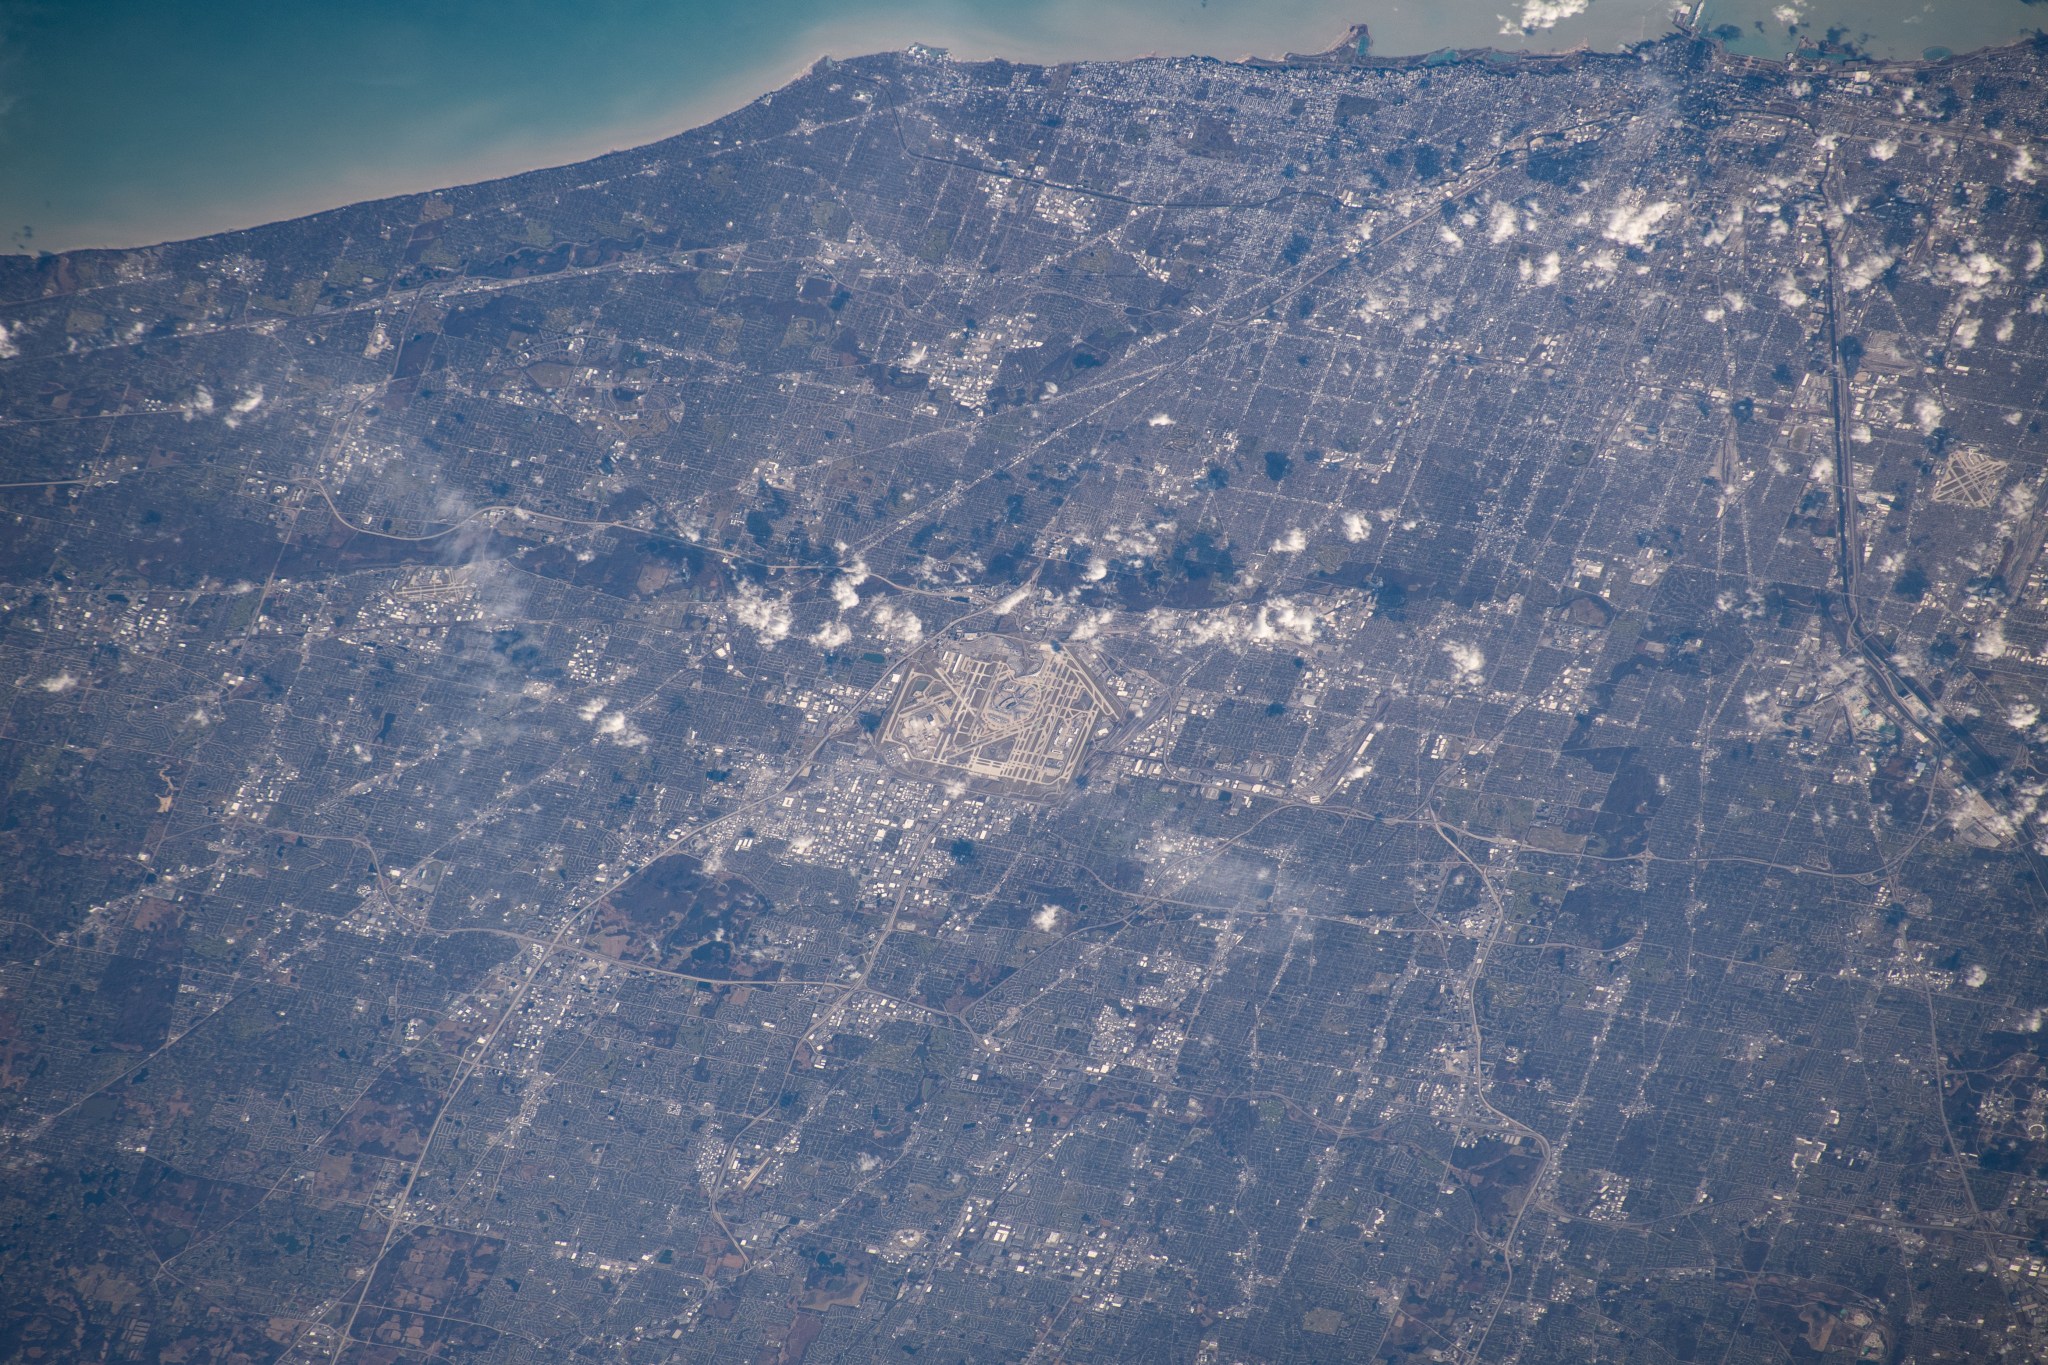 Chicago's O'Hare International Airport is centered in this photograph with the Windy City's downtown at the top right corner on the coast of Lake Michigan. The International Space Station was orbiting 259 miles above the state of Illinois when this picture was taken.